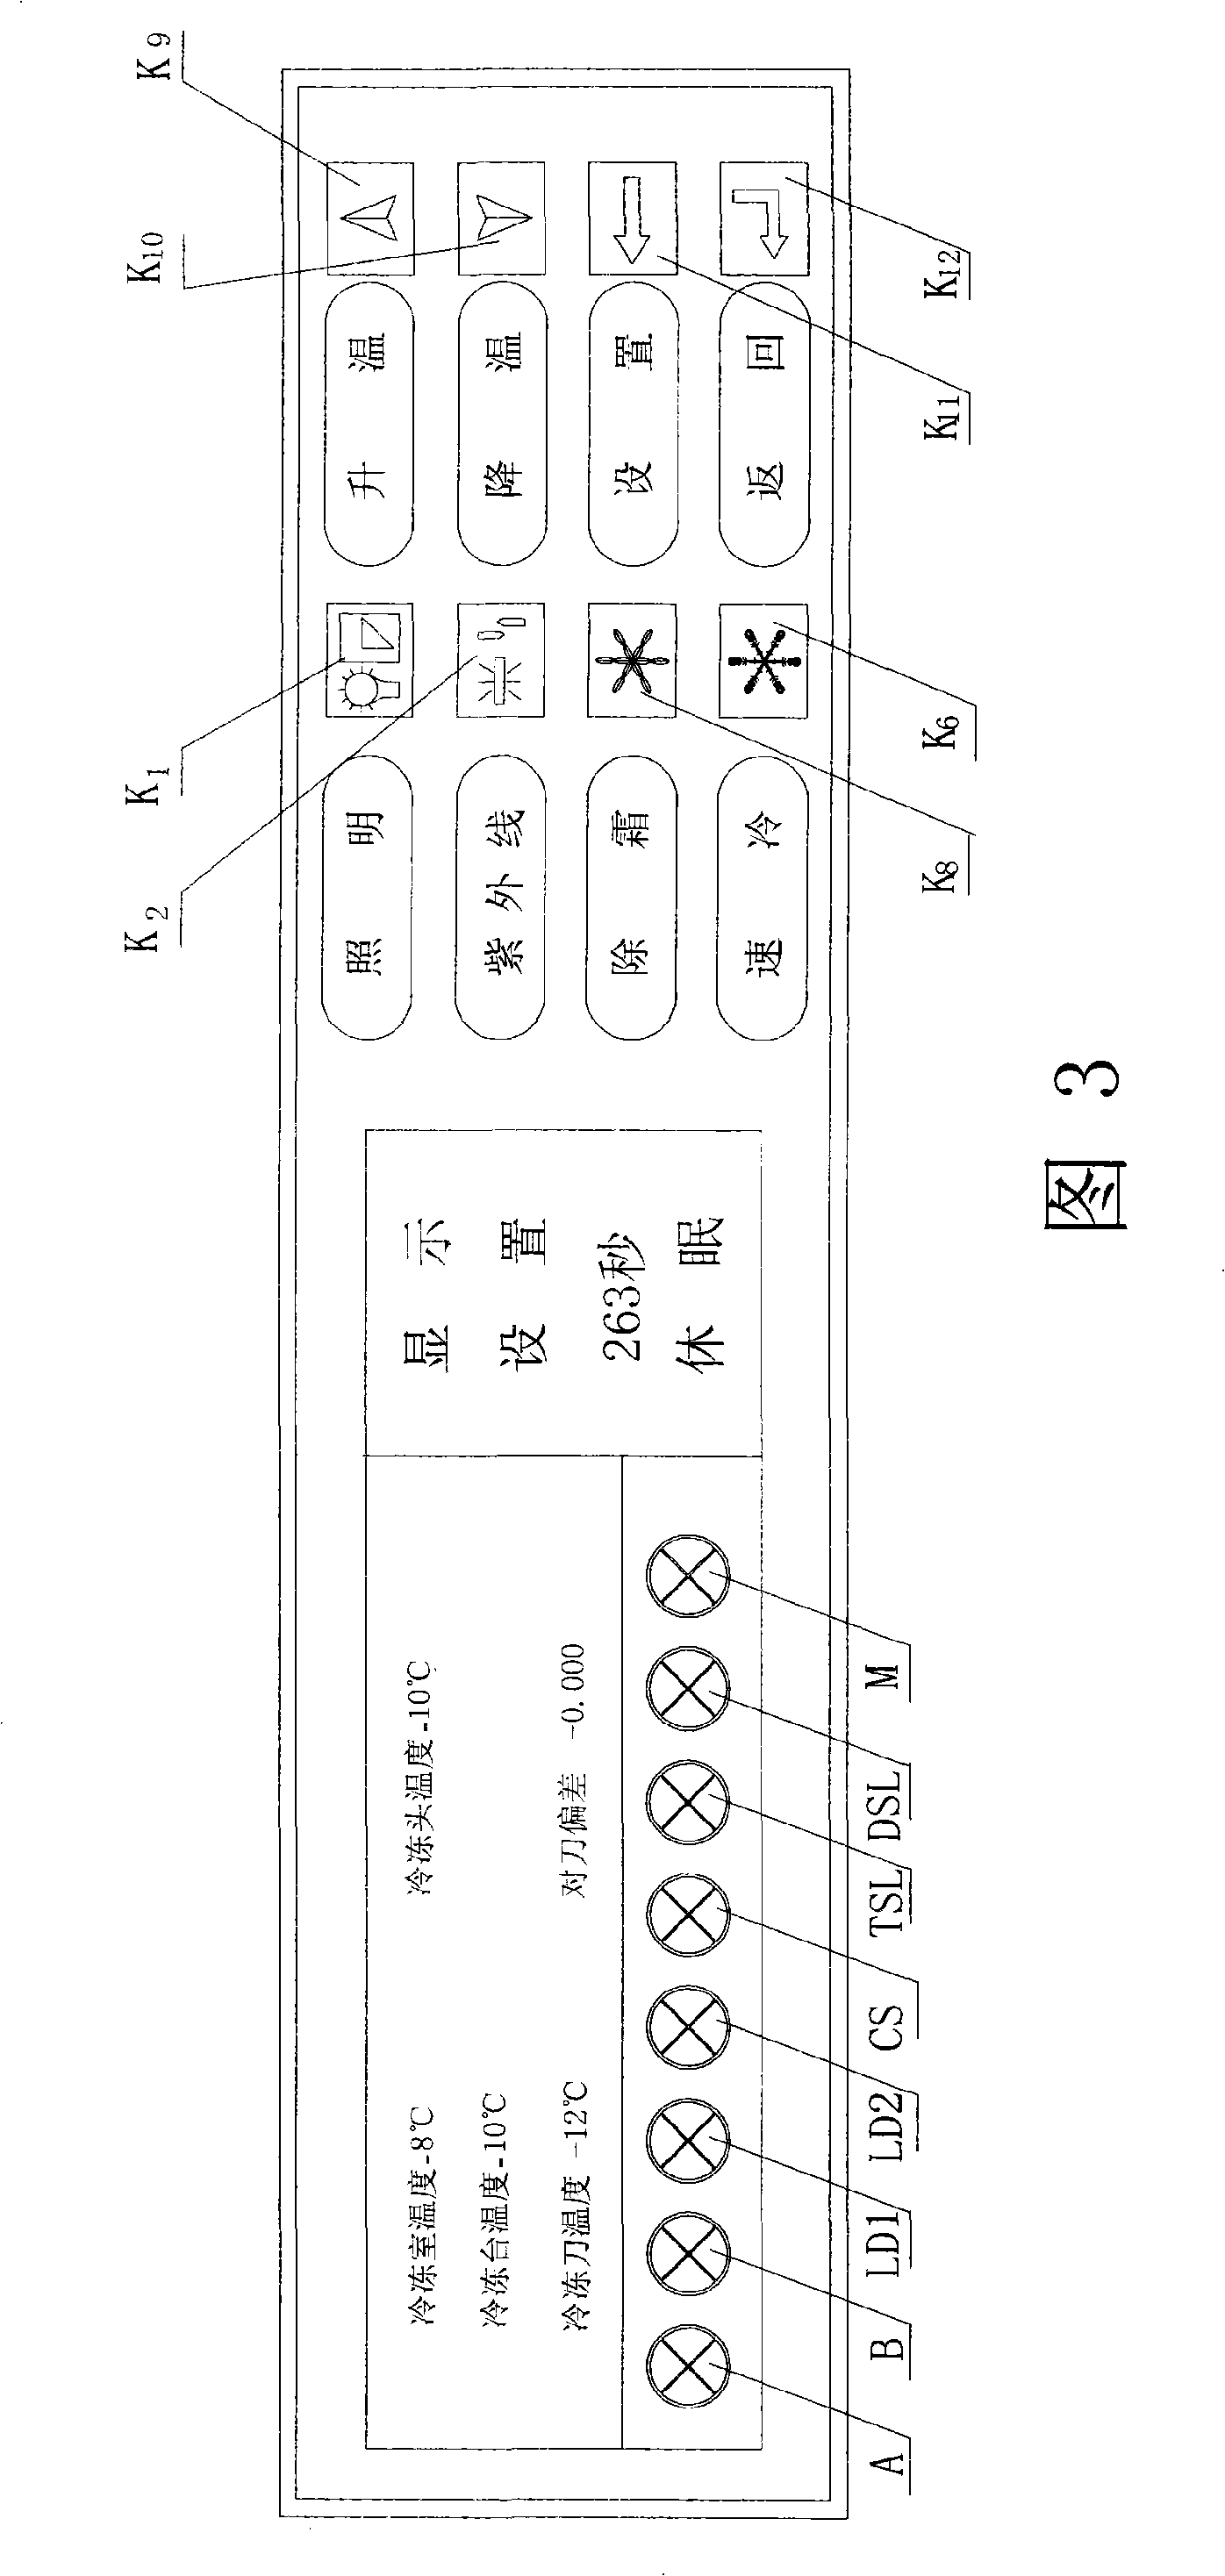 Operation dynamic display timing control four-point refrigeration automatic tool setting system of freezing microtome